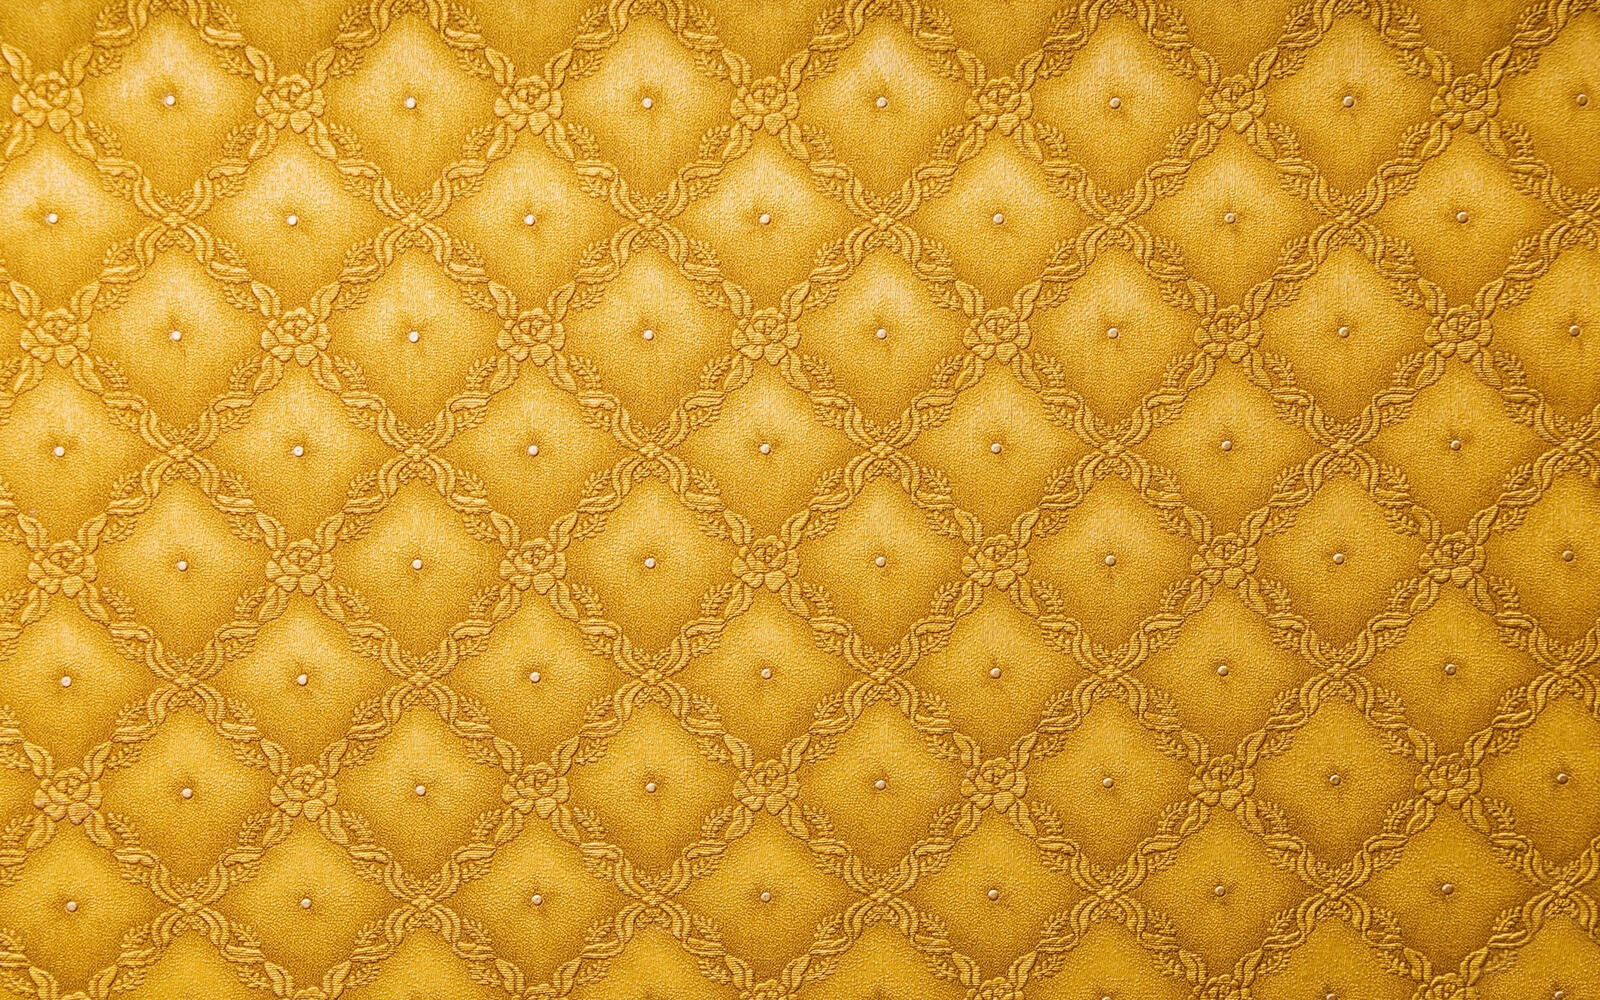 Wallpapers picture pattern rhombuses on the desktop